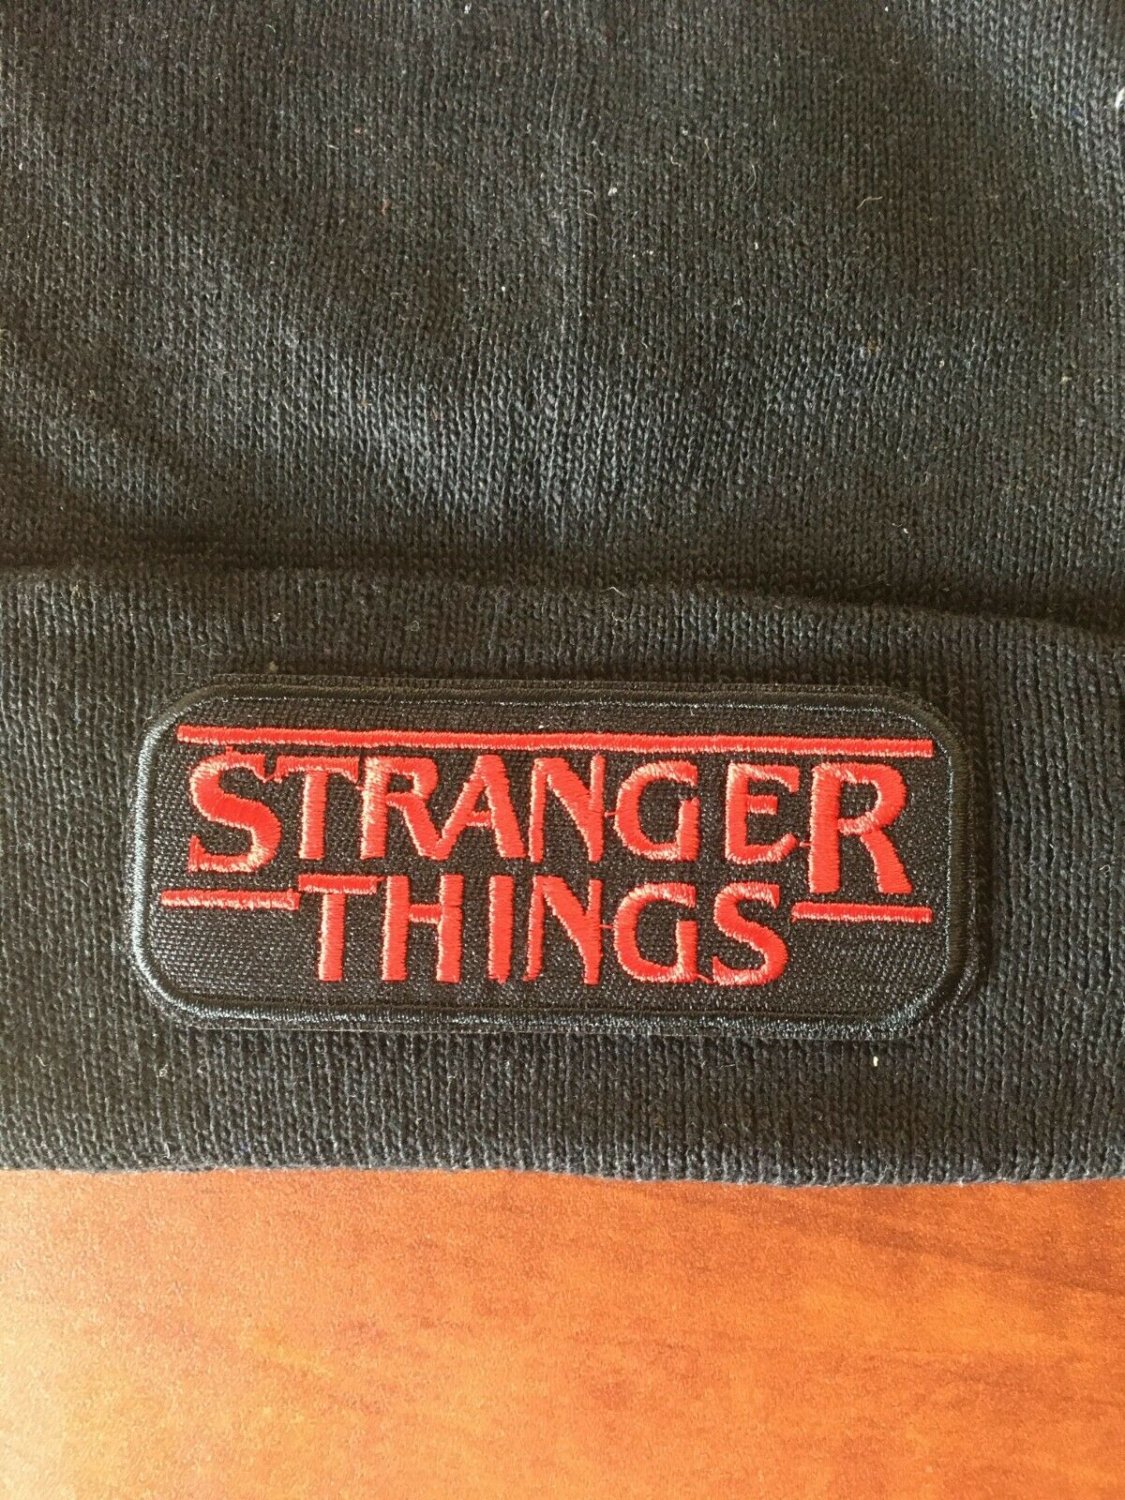 Stranger Things Beanie One Size Fits All New